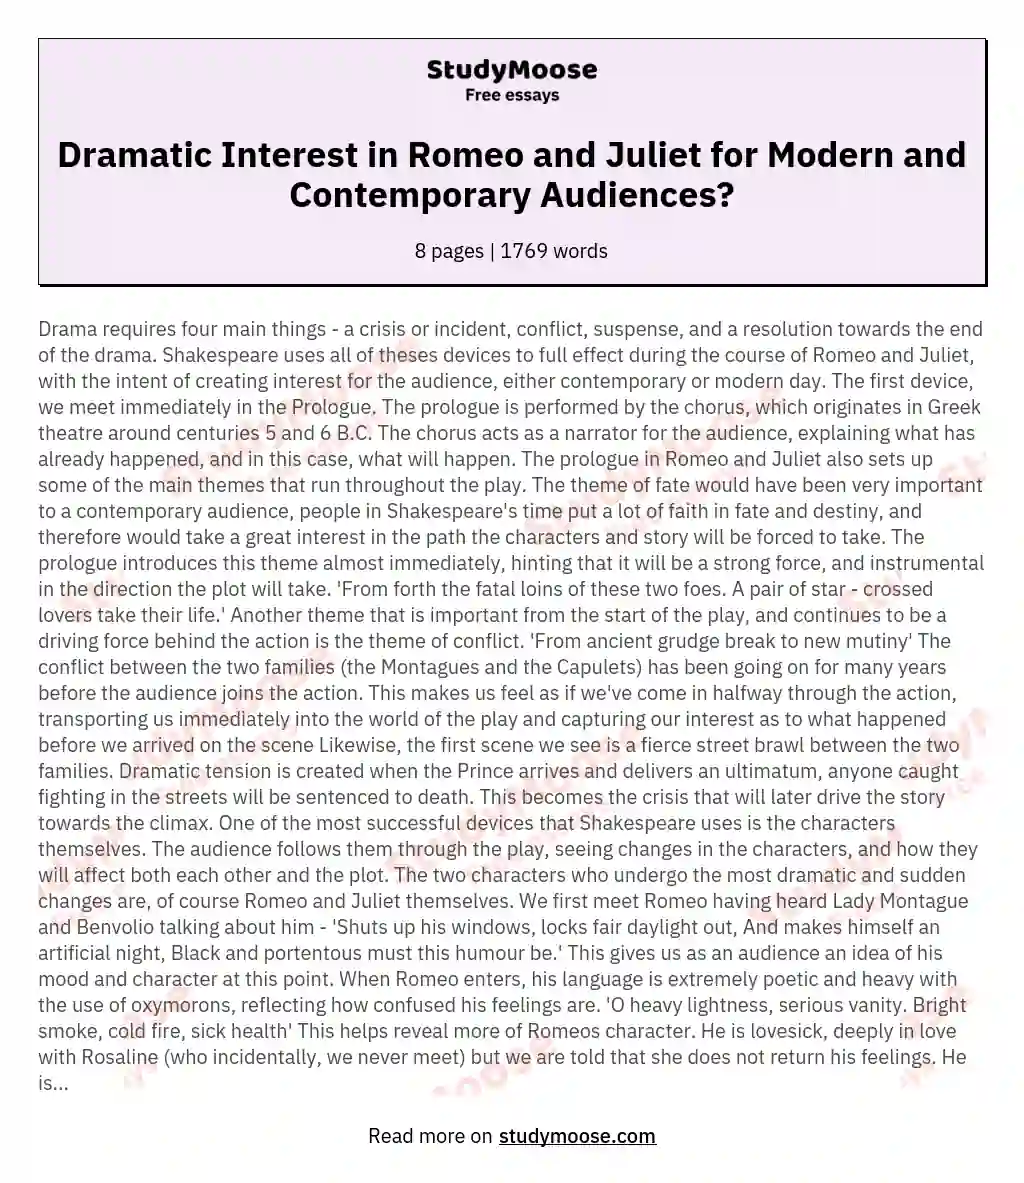 Dramatic Interest in Romeo and Juliet for Modern and Contemporary Audiences? essay